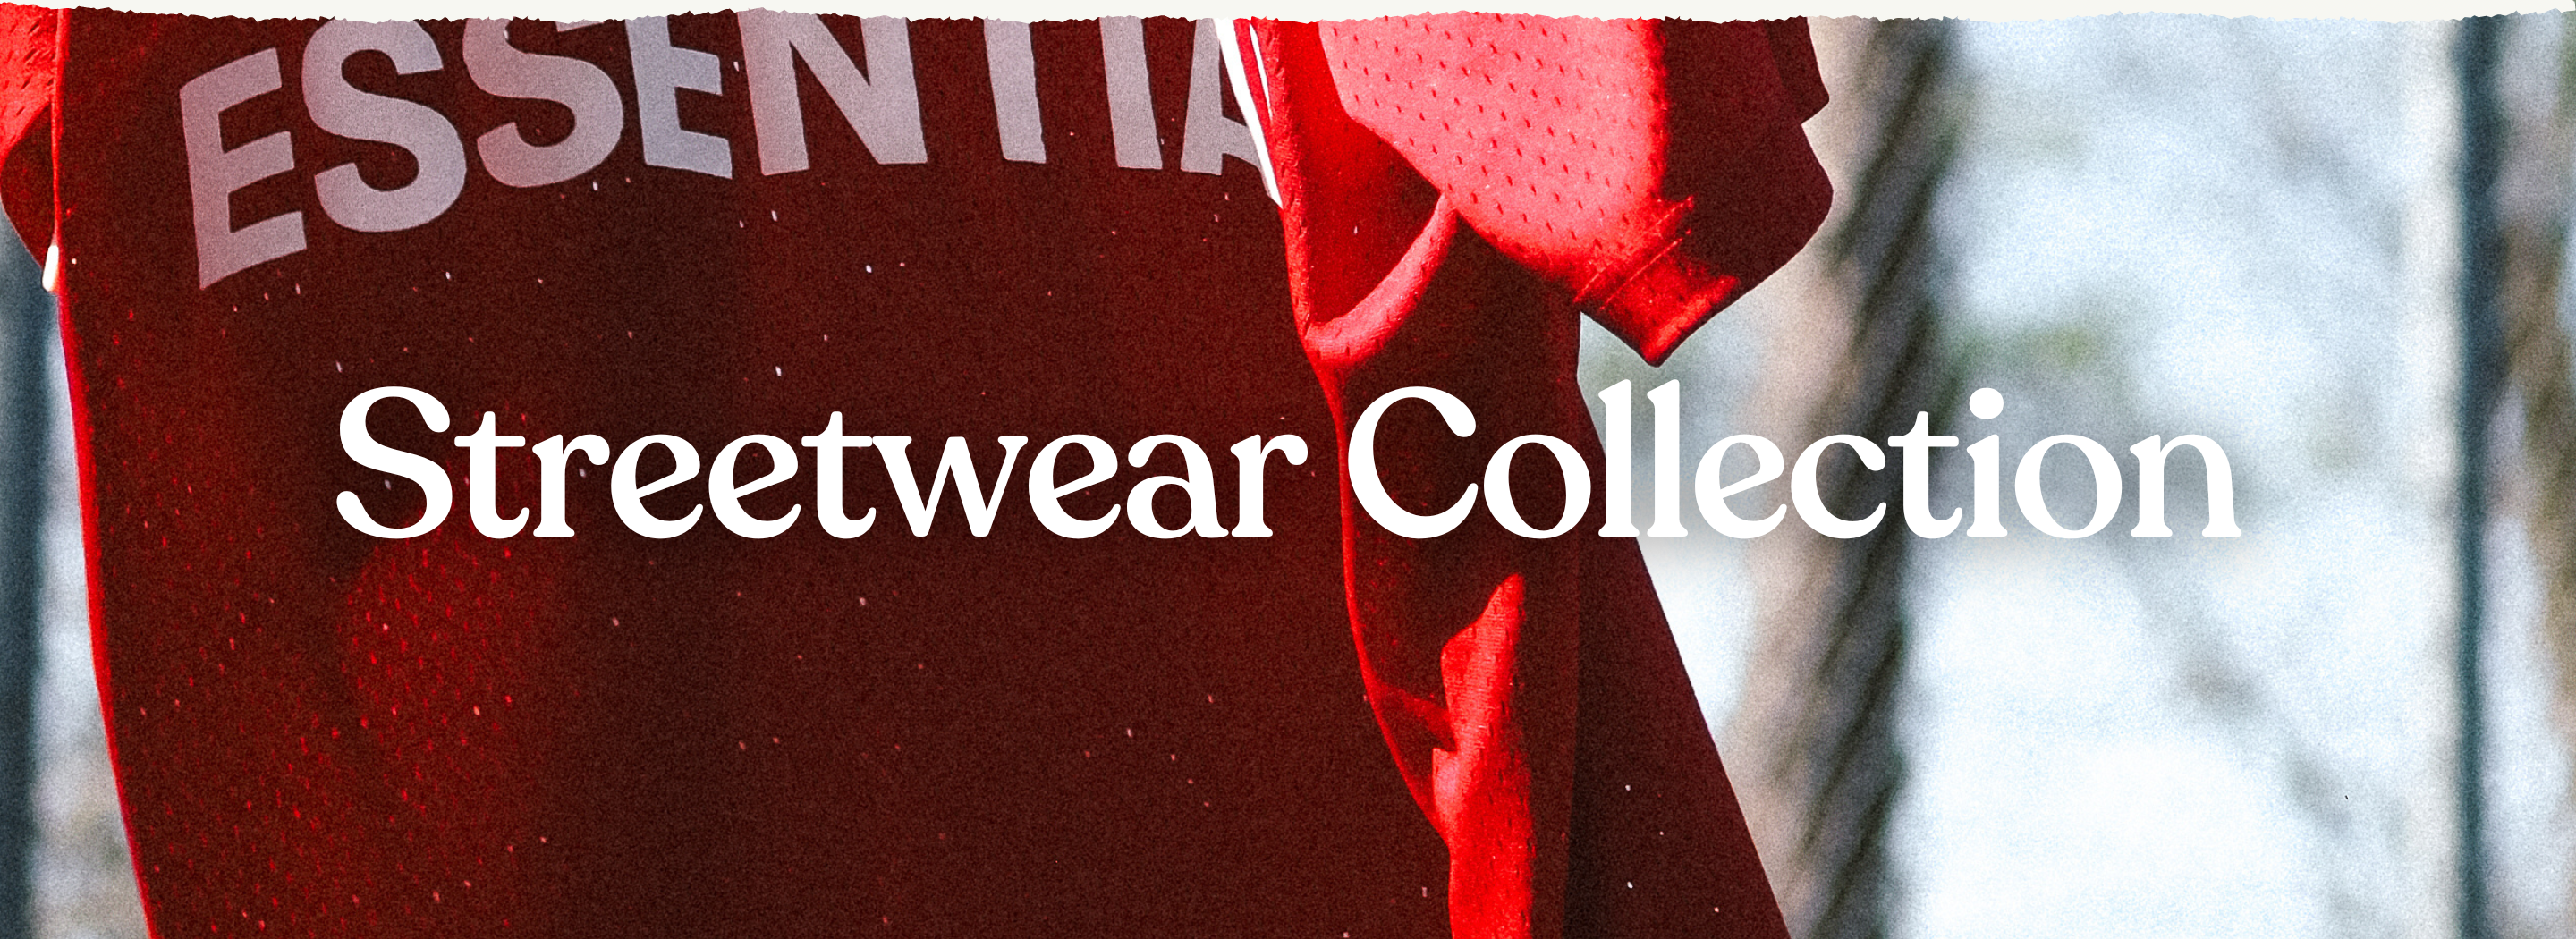 a red jersey in the air with caption: "Streetwear Collection"